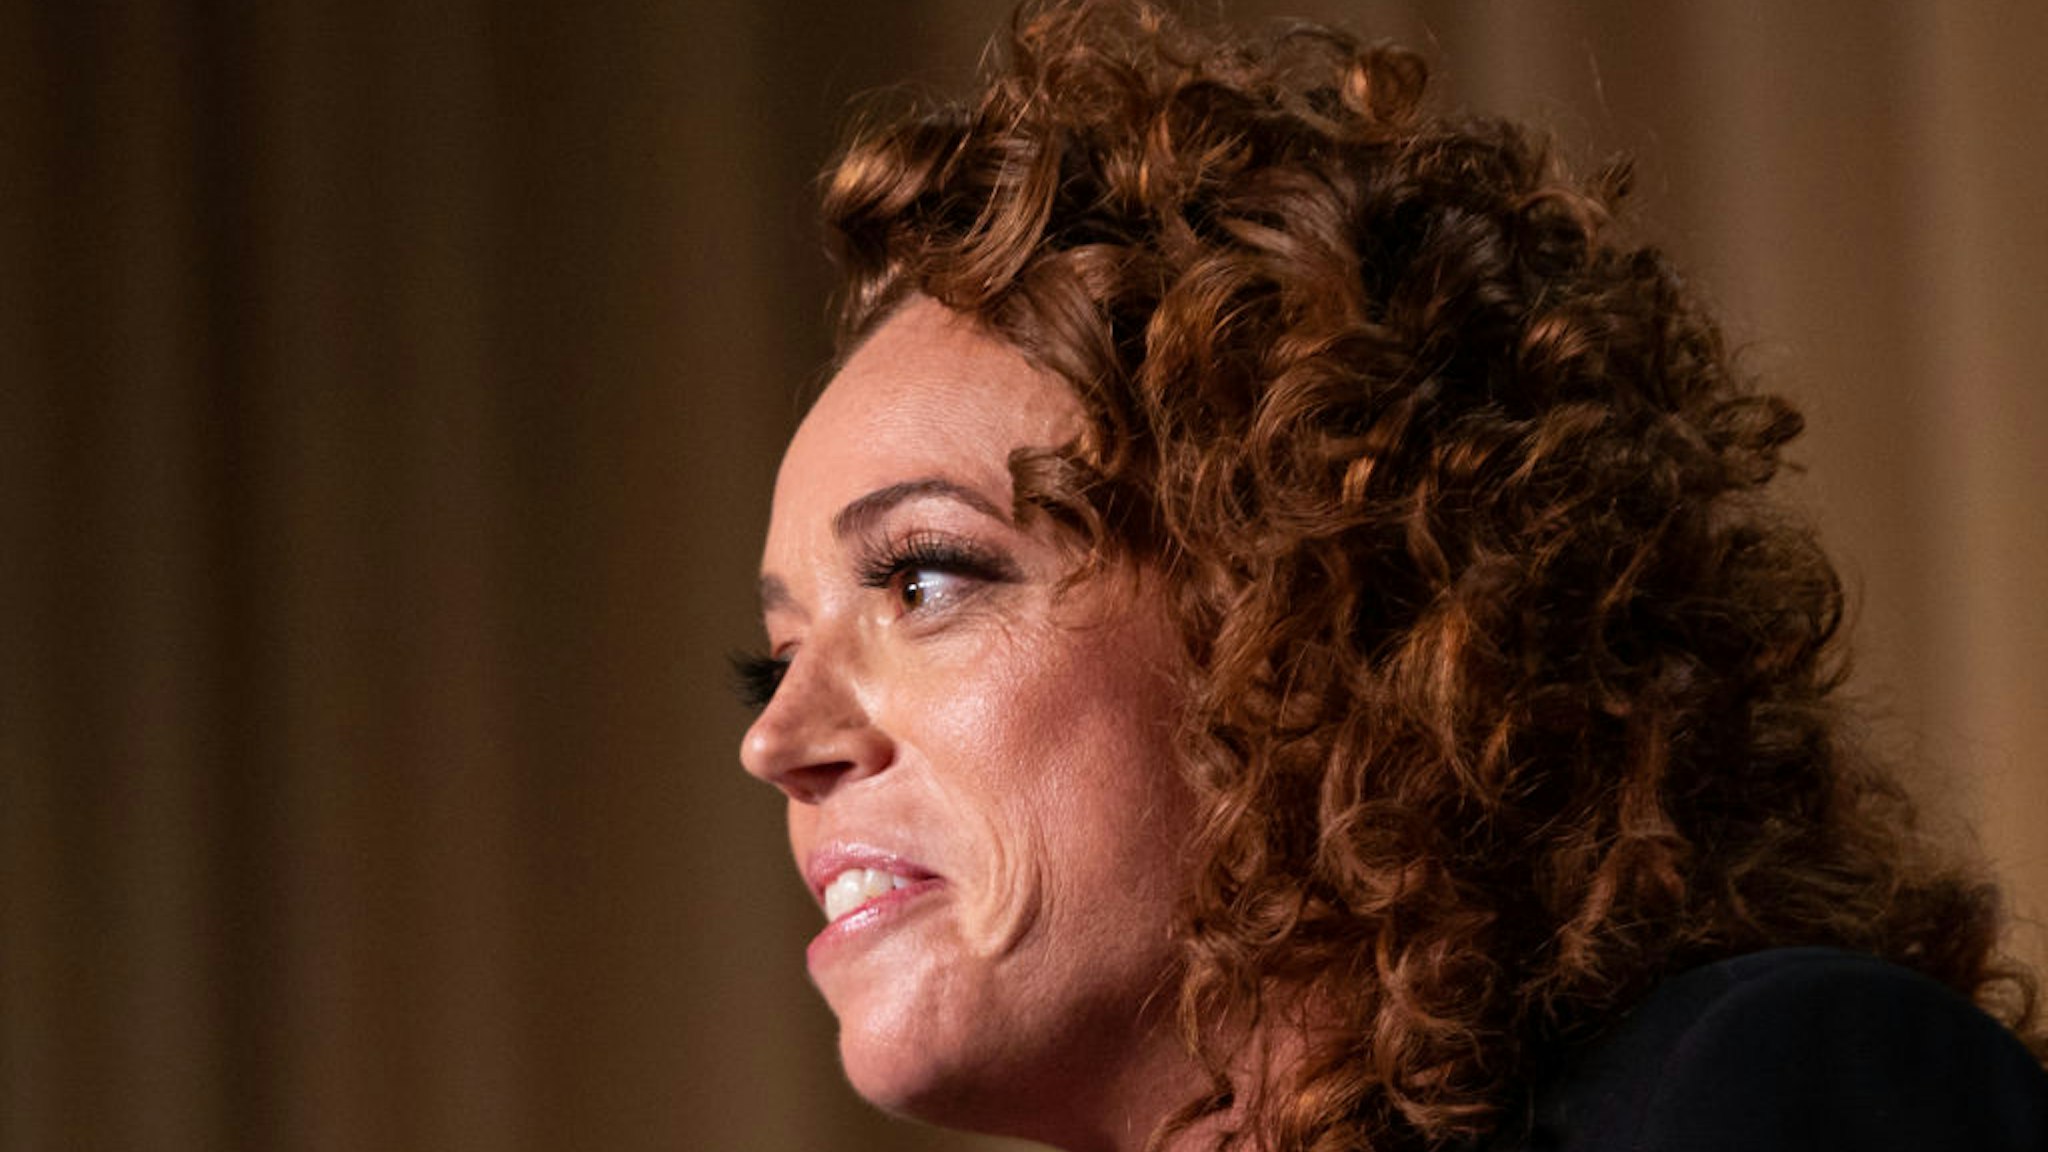 Comedian Michelle Wolf entertains guests at the White House Correspondents' Association (WHCA) dinner at The Washington Hilton in Washington, D.C., on Saturday, April 28, 2018.